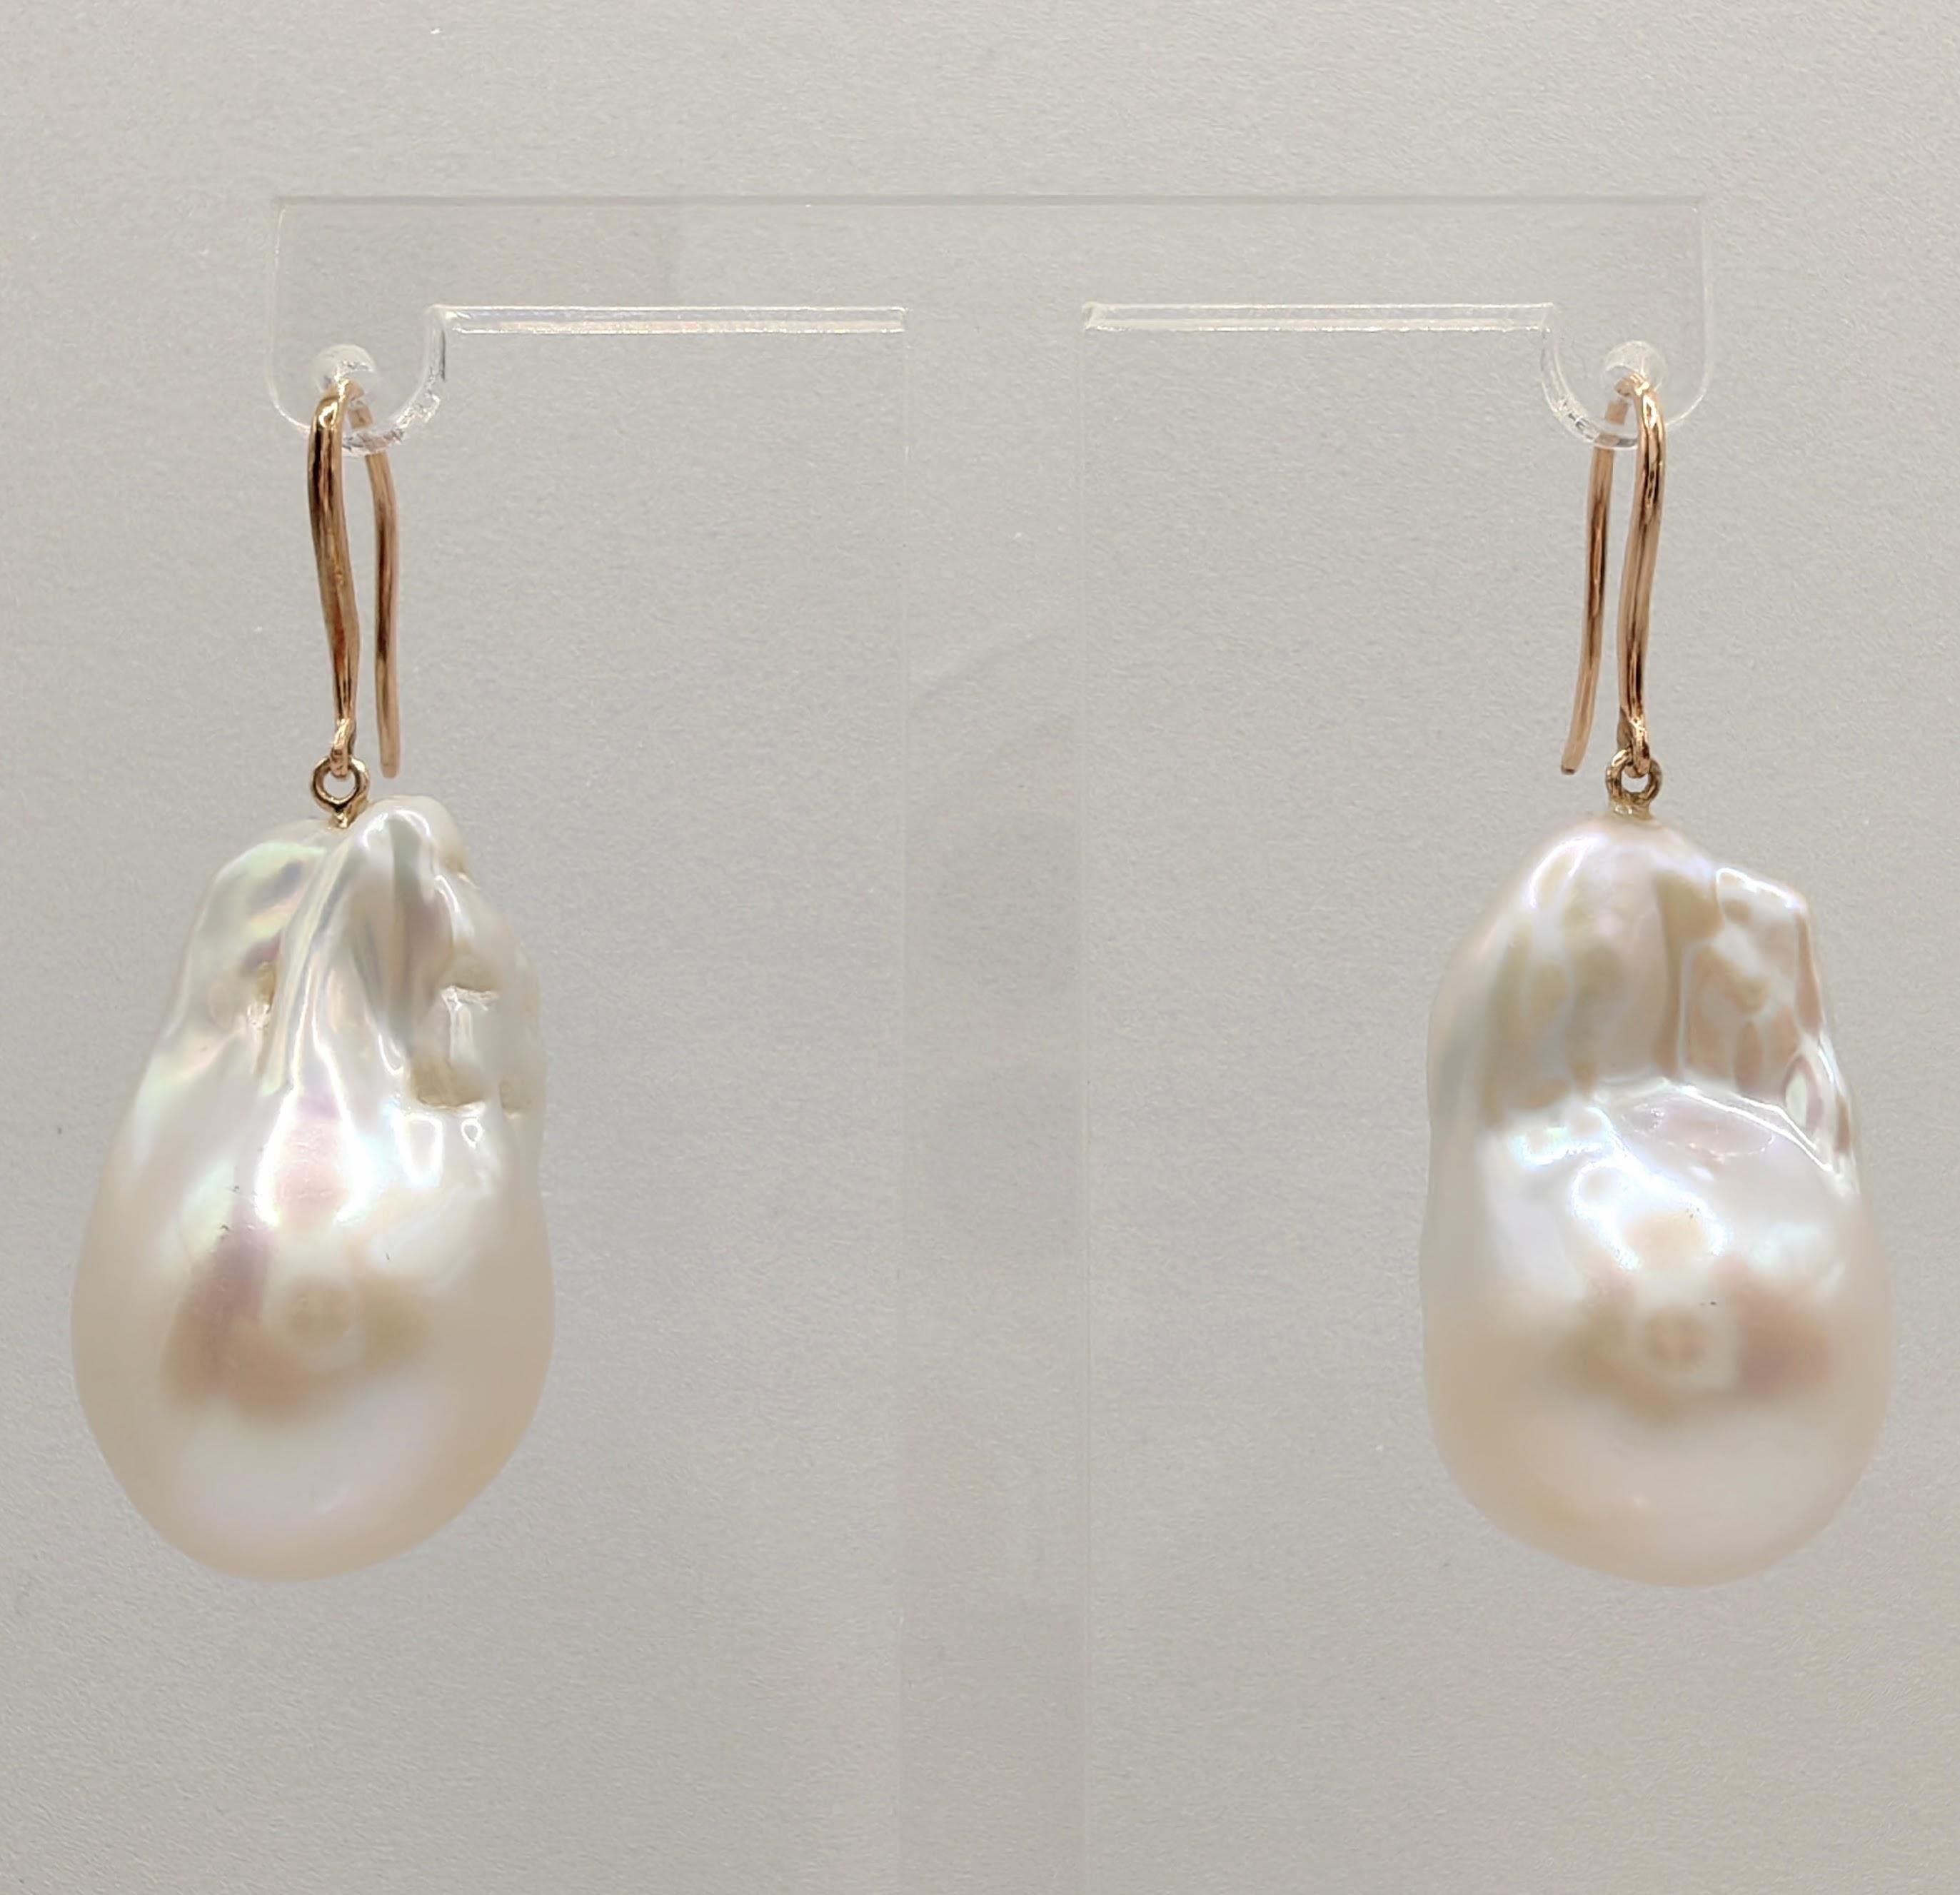 Indulge in the alluring grace of our Freshwater Baroque Pearl Dangling Drop Earrings, crafted to captivate and inspire. These remarkable earrings feature stunning Freshwater Cultured Baroque Pearls, boasting a brilliant white hue with a delicate